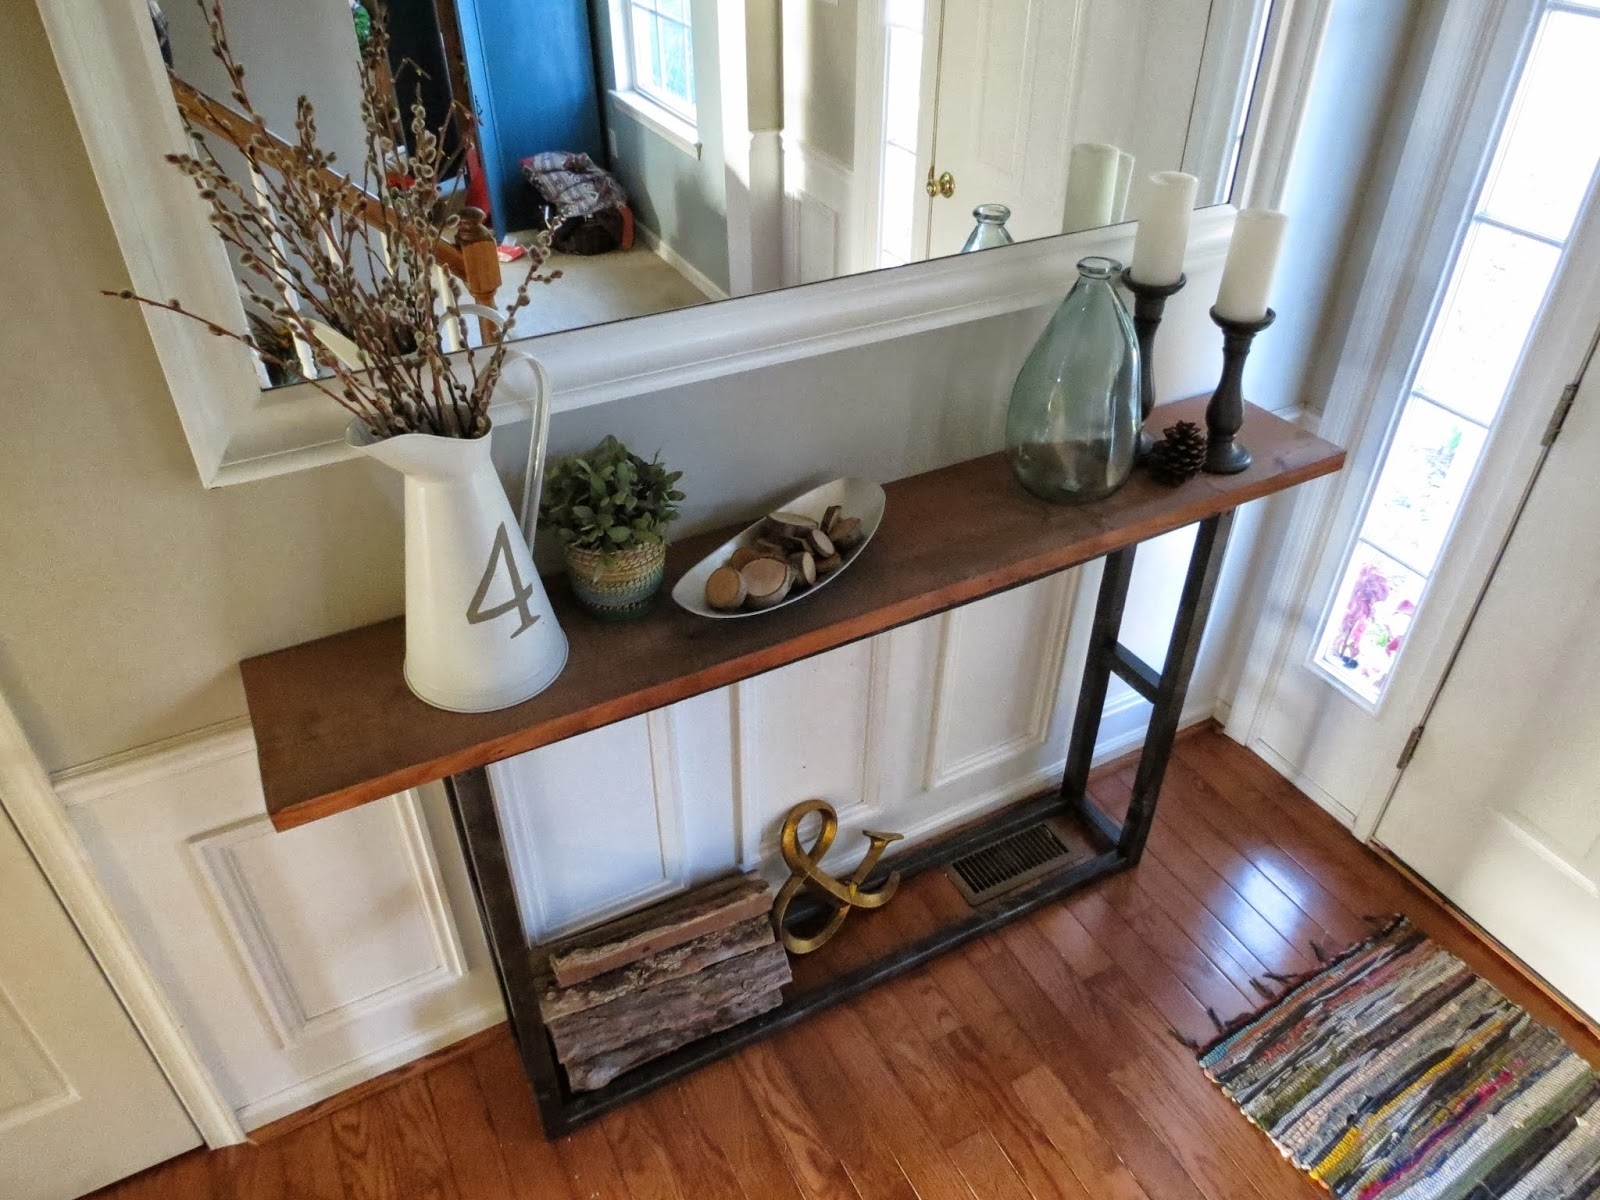 Narrow Console Tables With Storage - Foter